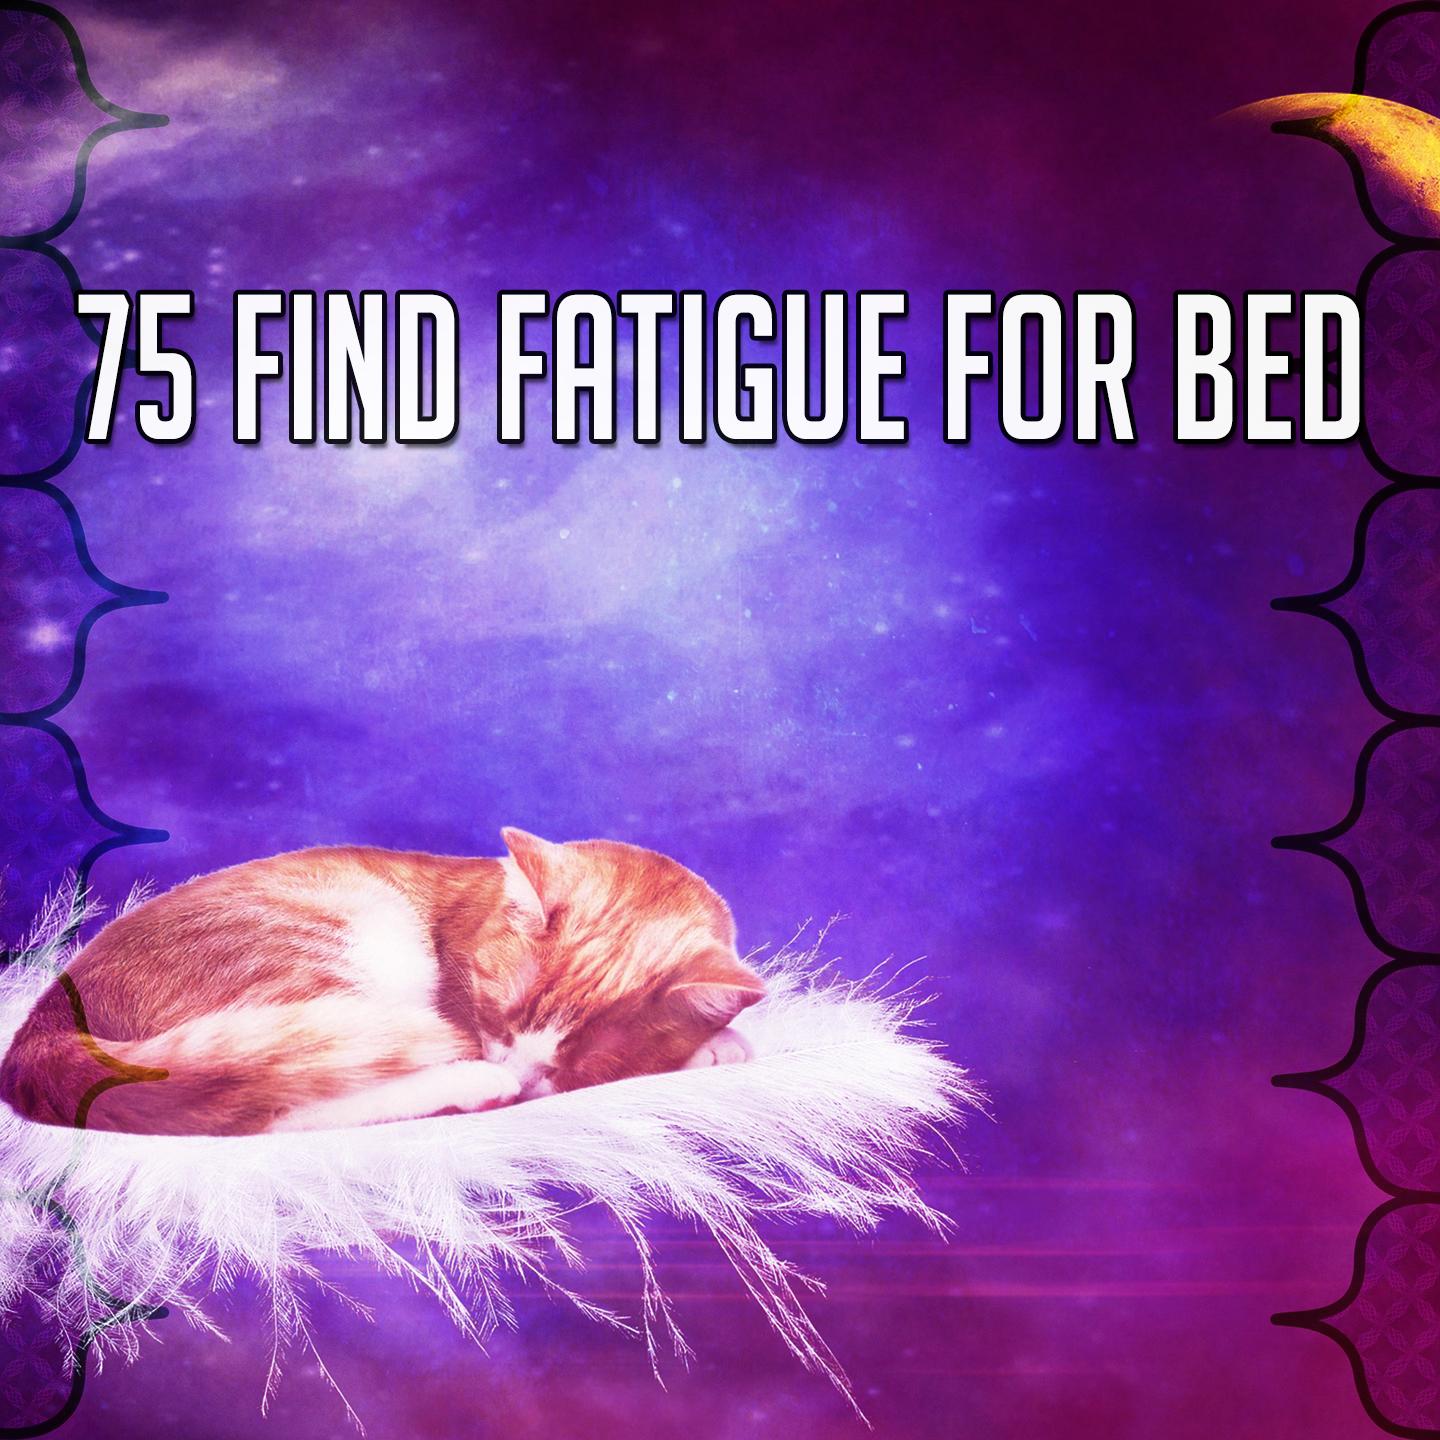 75 Find Fatigue for Bed